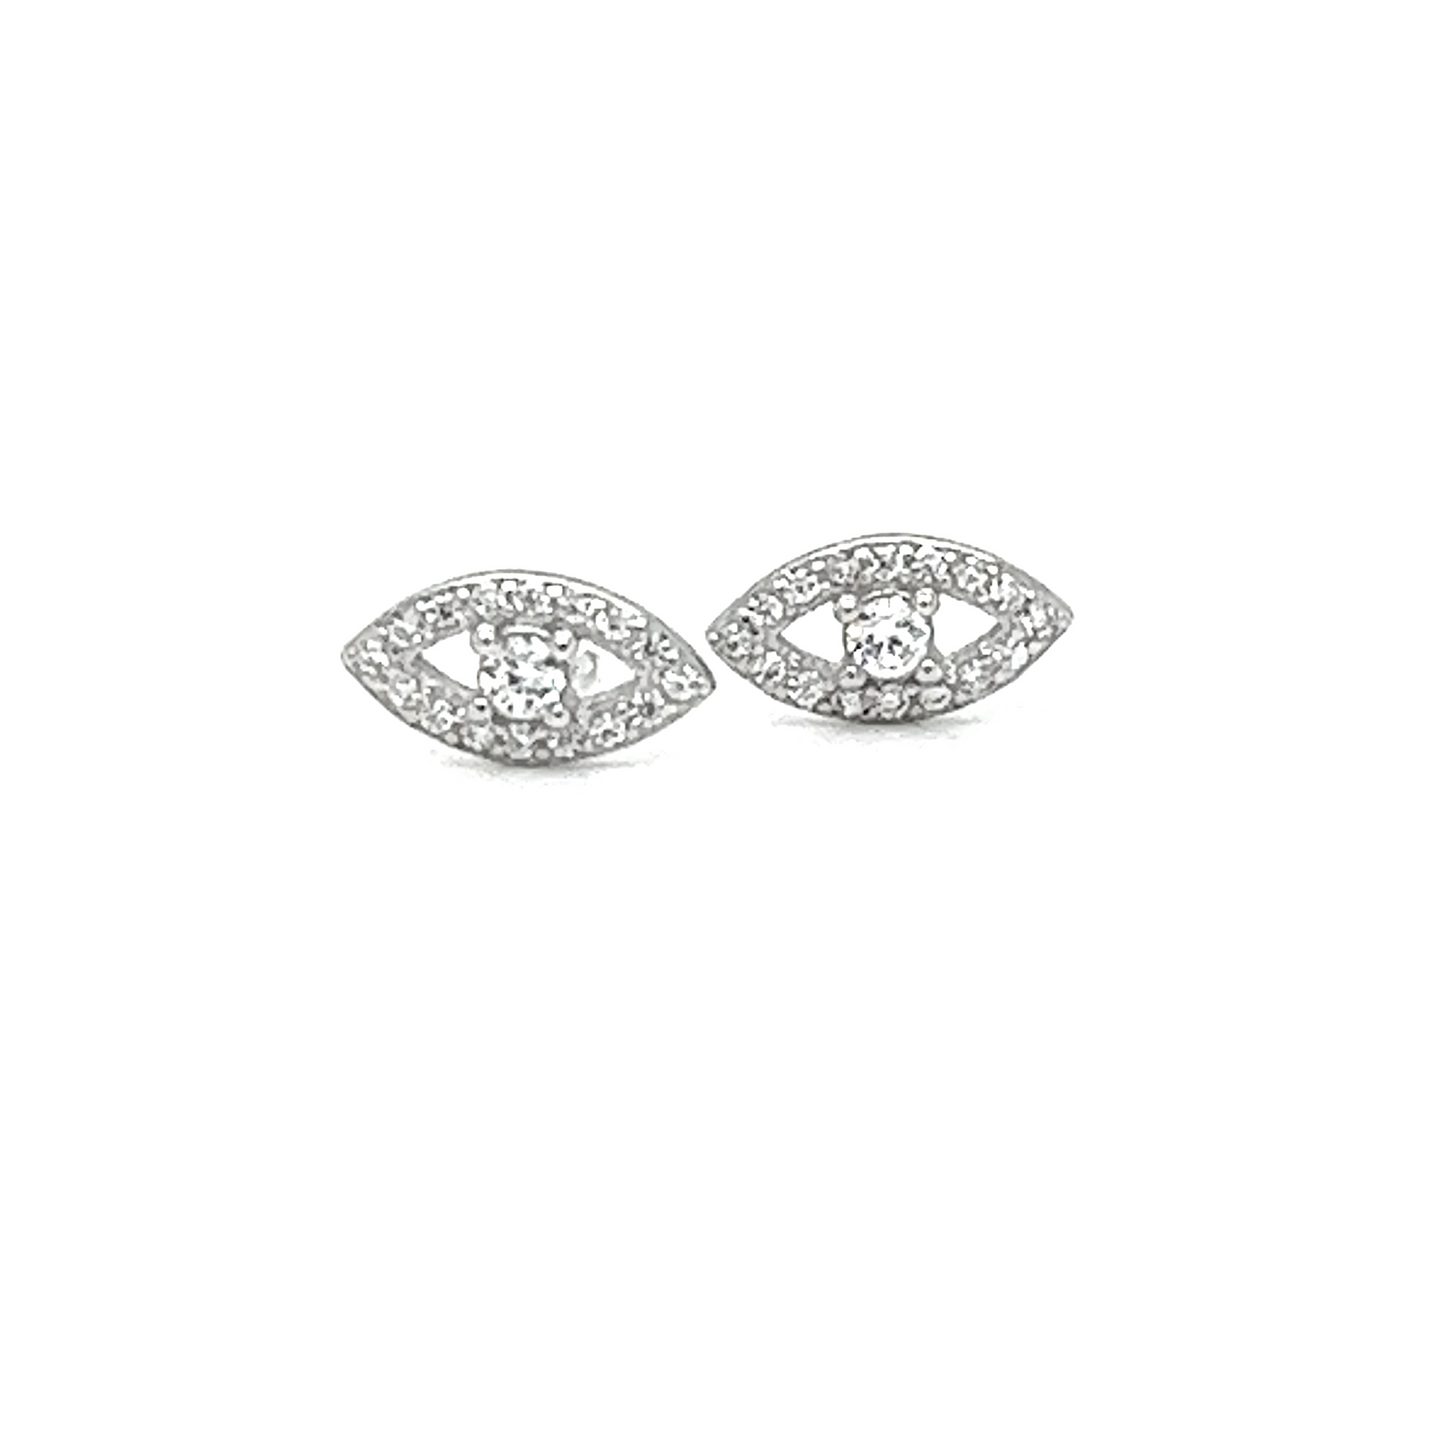 A pair of Super Silver CZ Eye Studs featuring symbolism and cubic zirconia accents.